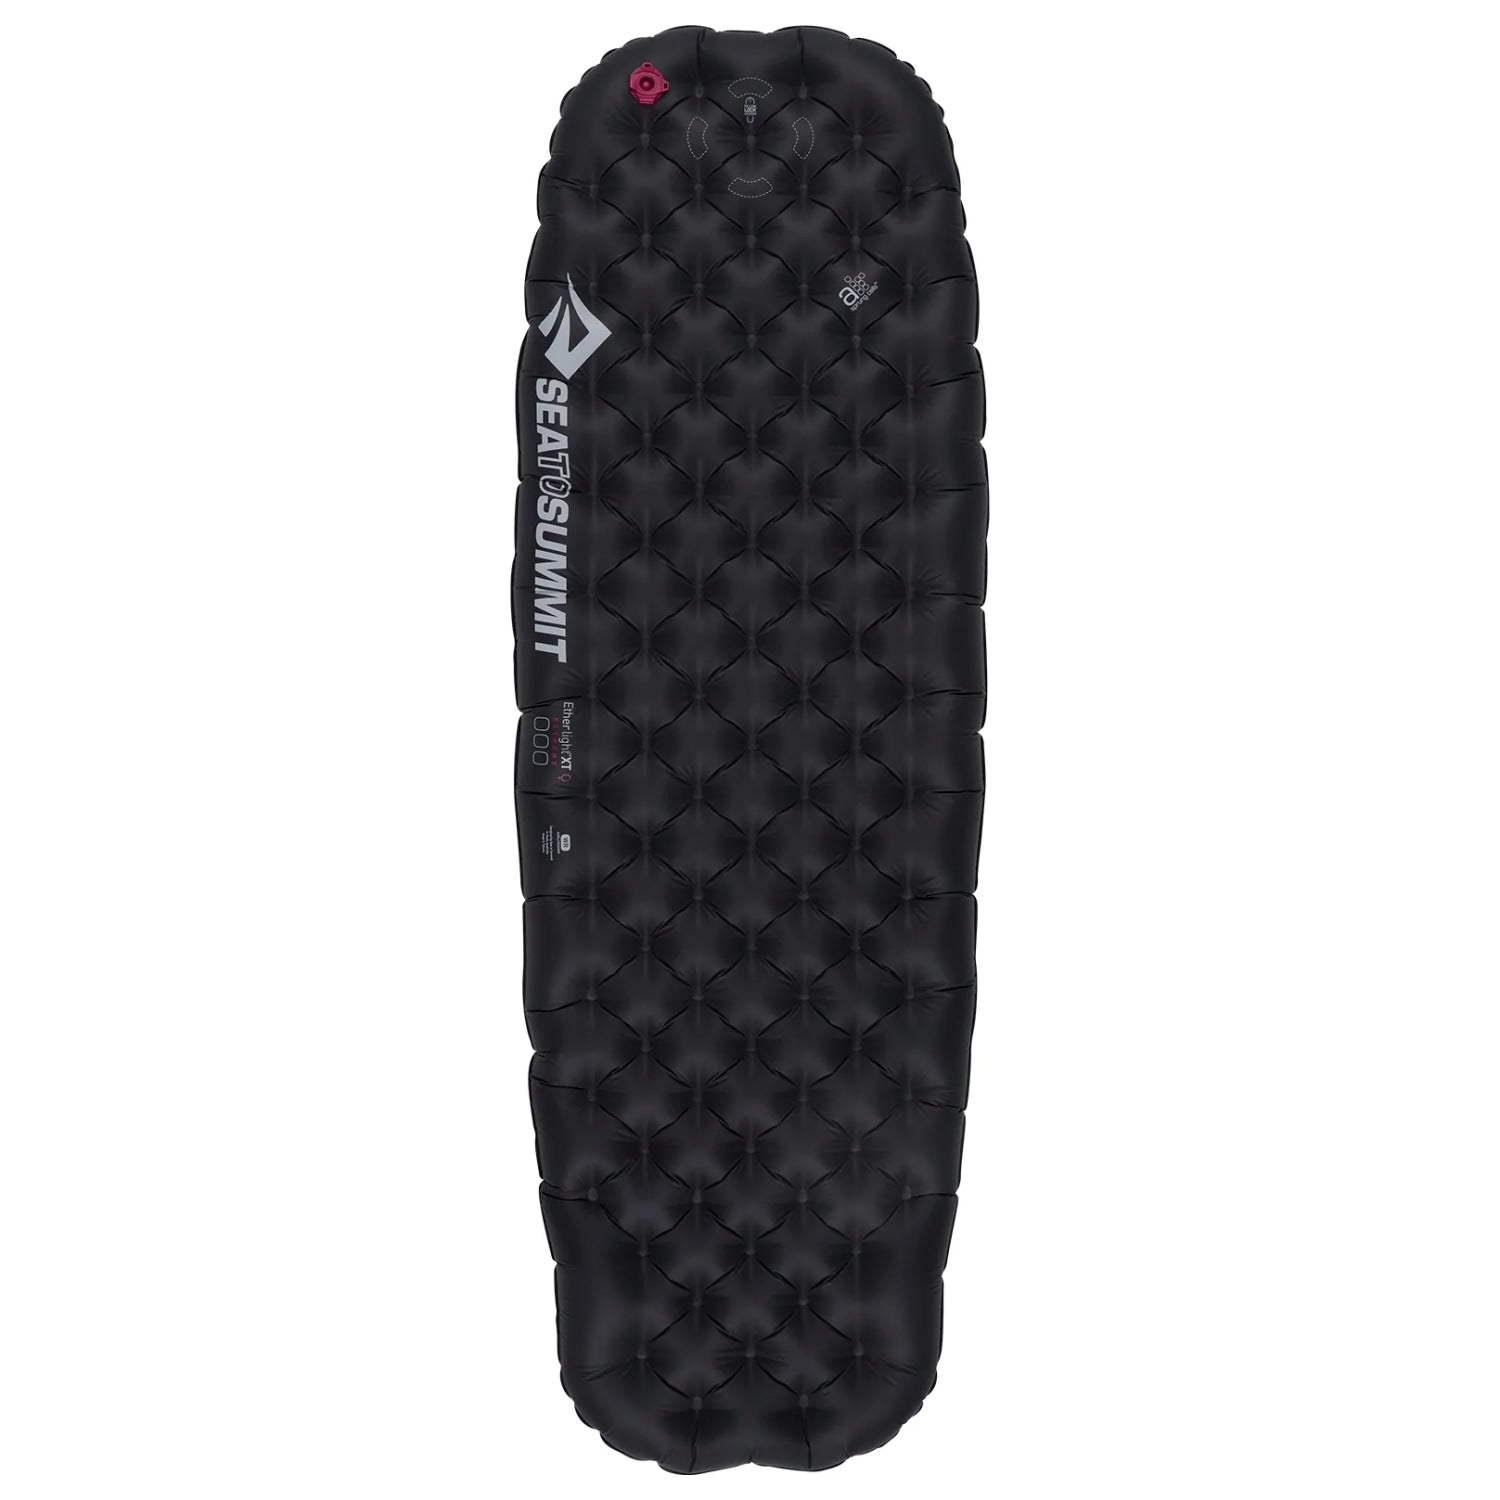 Sea To Summit Women's Ether Light XT Extreme Insulated Sleeping Mat, R-Value 6.2, 10cm thick